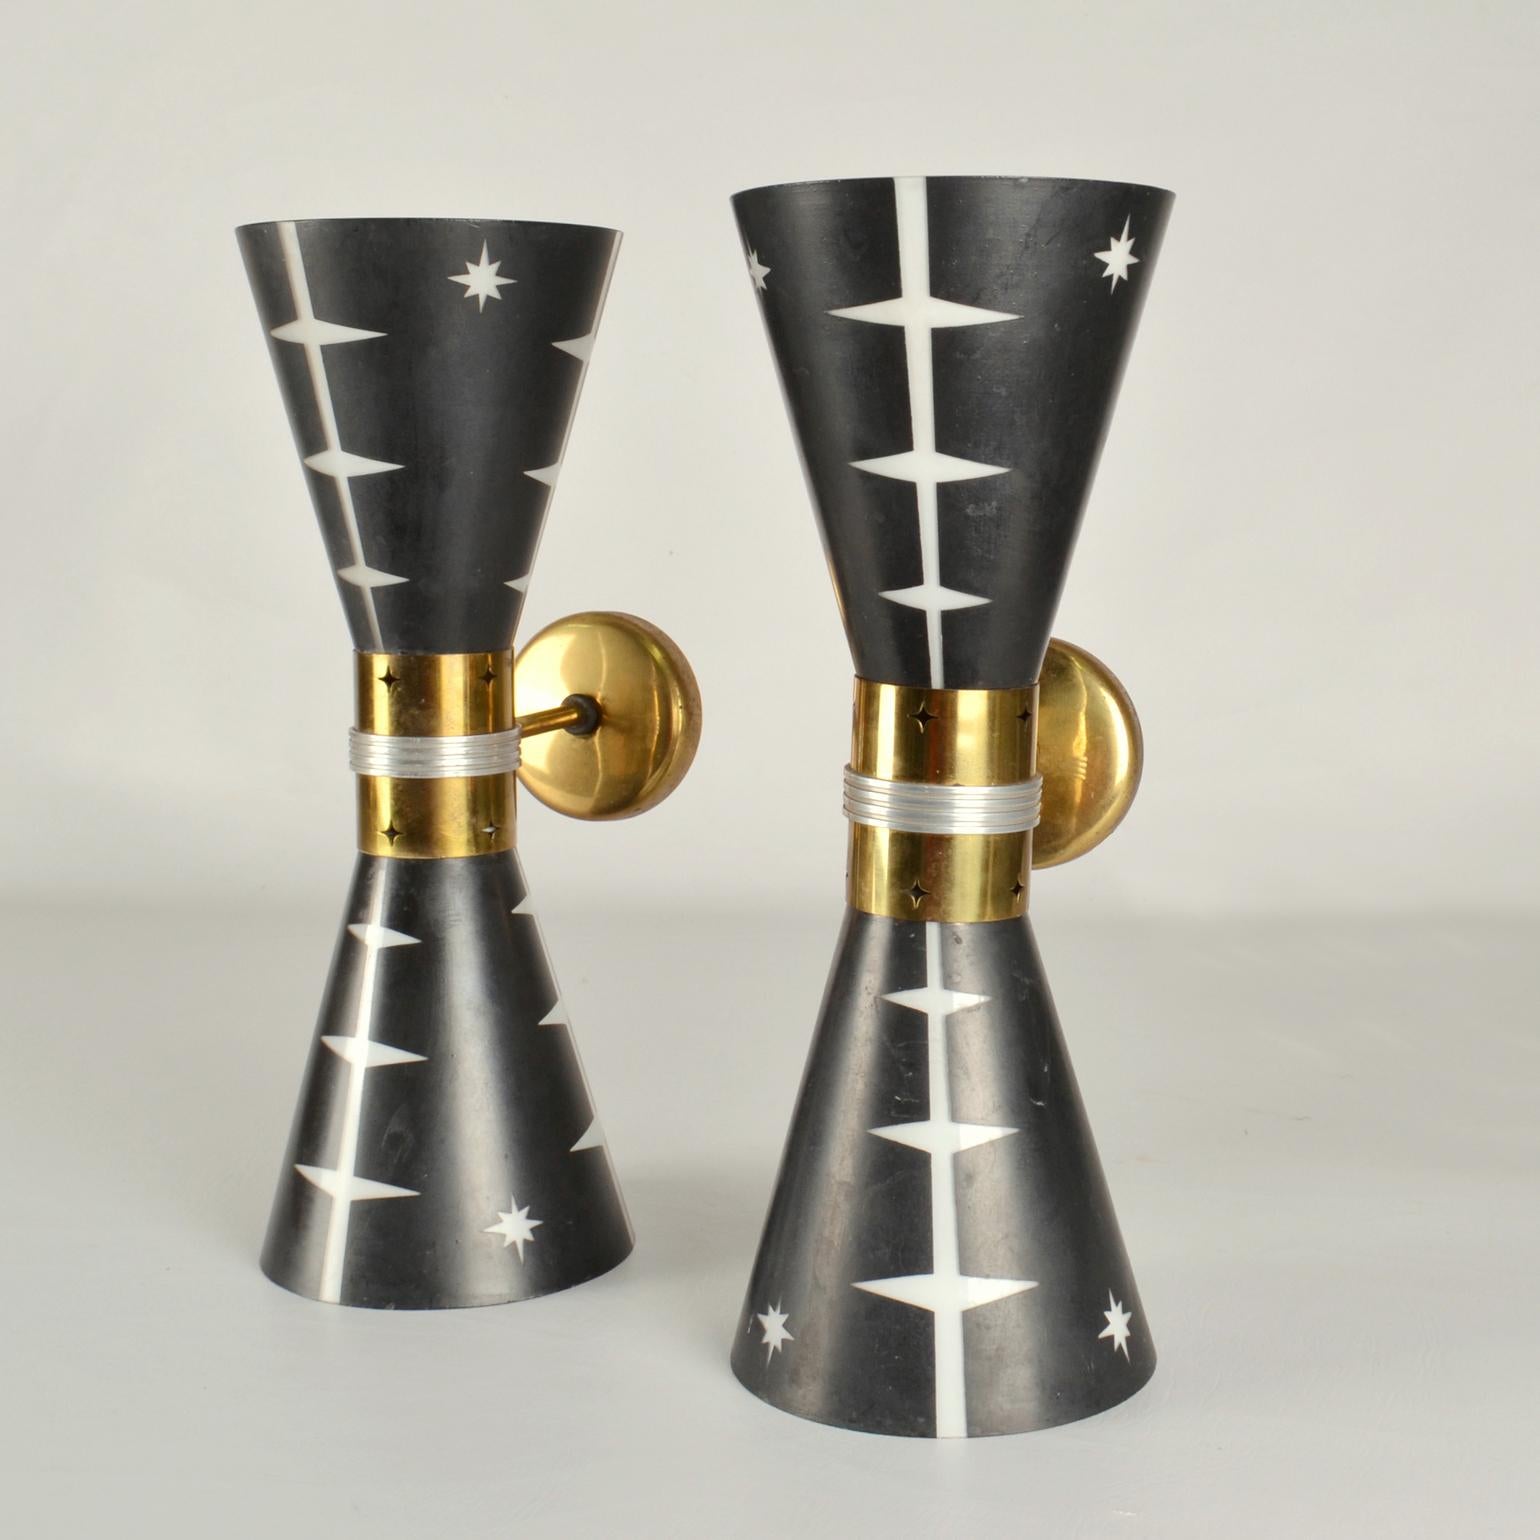 Rare Pair of 1950’s Hourglass Wall Lights in Black and White Glass and Brass For Sale 1